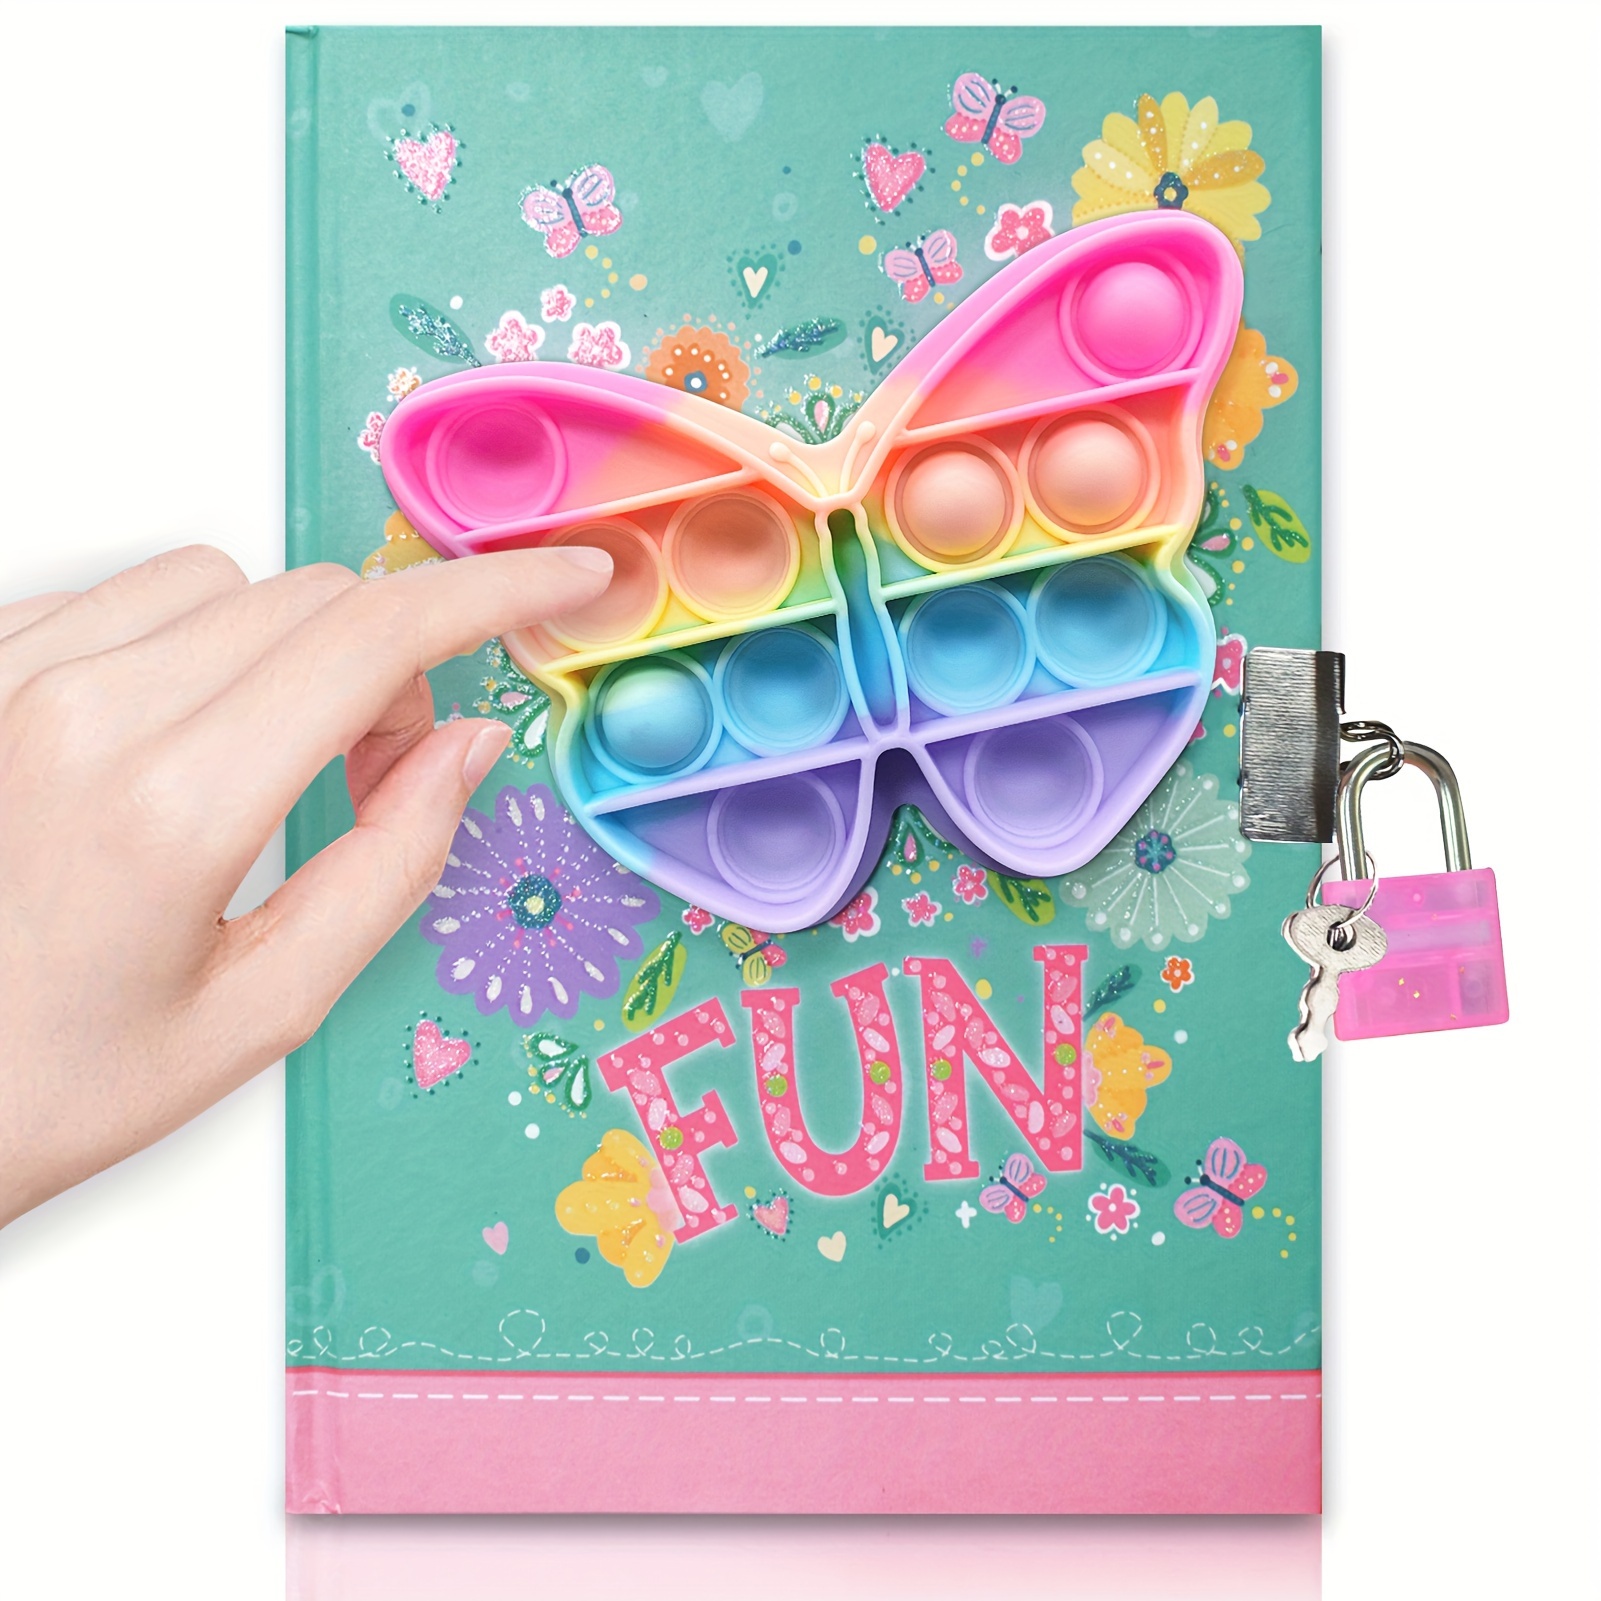 

Pop Diary Girls With Lock, Fidget Diary Girl's Journal 7.5 X 5.3 Inches 160 Pages, Journal For Teenagers School Writing Drawing Gifts